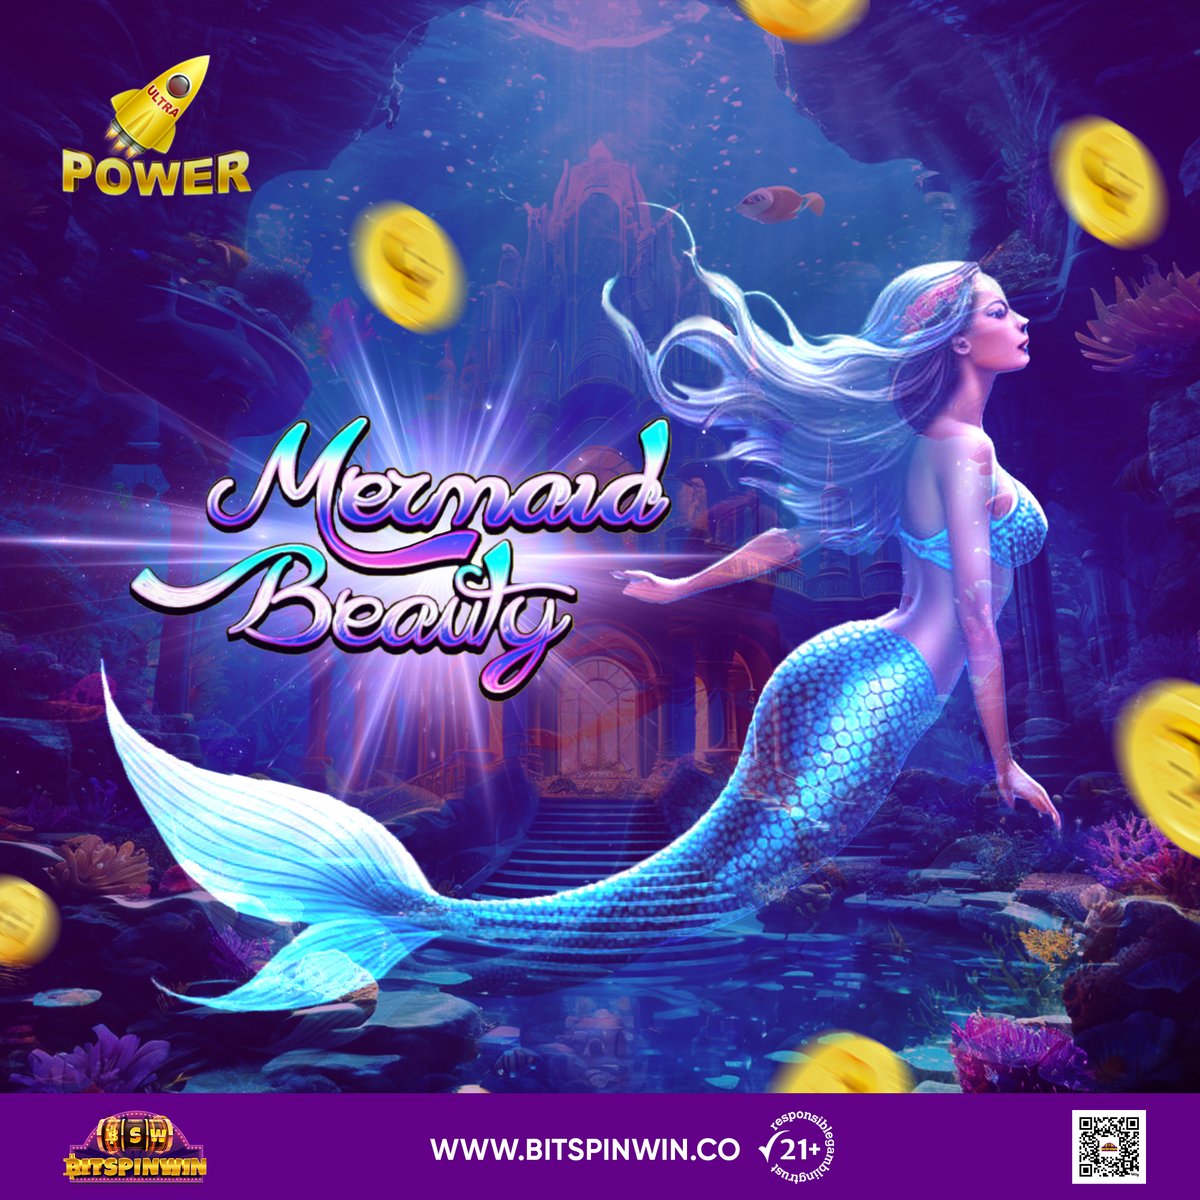 🔥𝐇𝐨𝐭 & 𝐍𝐞𝐰🔥 🧜‍♀️Depths of Mermaid Beauty invites you to 🌊𝐔𝐧𝐢𝐪𝐮𝐞 𝐠𝐚𝐦𝐞𝐩𝐥𝐚𝐲 𝐦𝐞𝐜𝐡𝐚𝐧𝐢𝐜𝐬 🌊𝐏𝐨𝐰𝐞𝐫𝐟𝐮𝐥 𝐰𝐢𝐧𝐧𝐢𝐧𝐠 𝐜𝐨𝐦𝐛𝐢𝐧𝐚𝐭𝐢𝐨𝐧𝐬 Play on Ultra Power: bit.ly/twdepositbsw . #USA #slotonline #TrendingNow #roulettefree #OnlineCasino